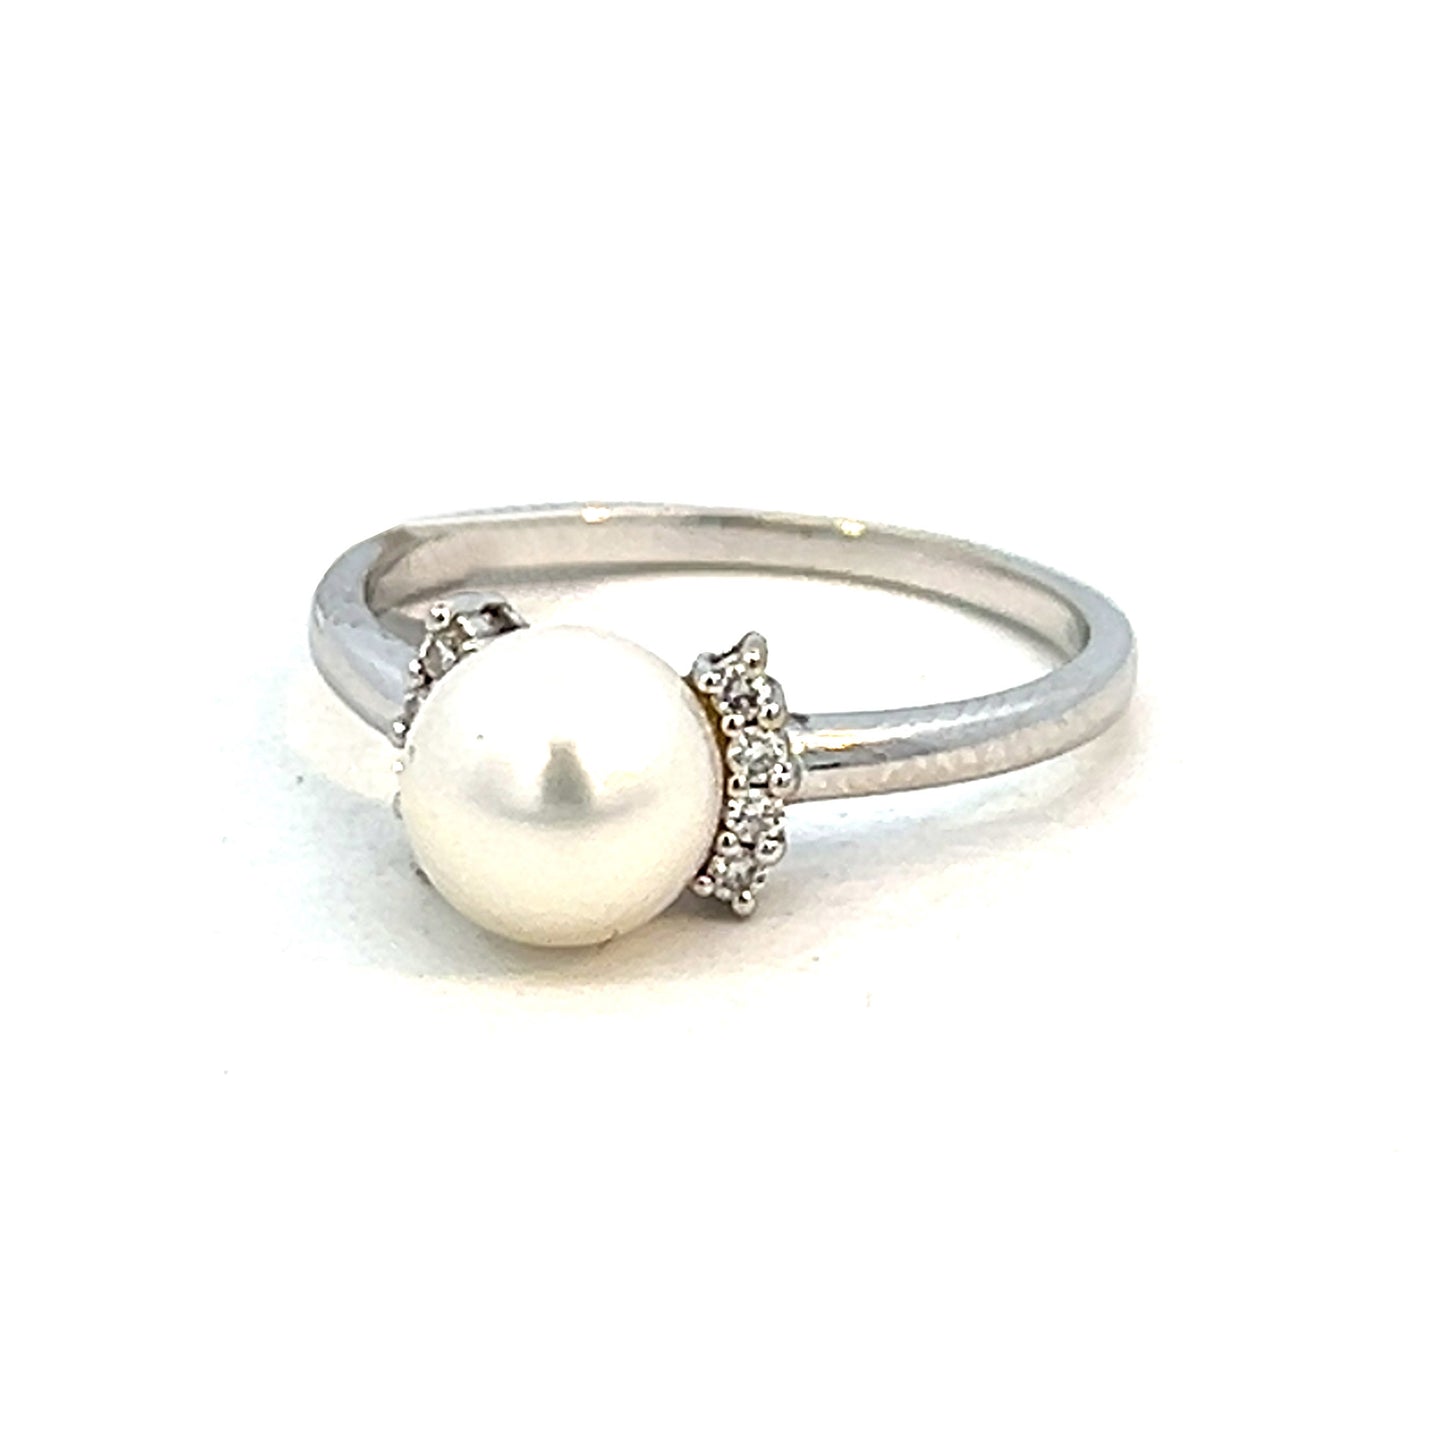 6mm Pearl and Diamond Ring | Pearl and Diamond White Gold Ring